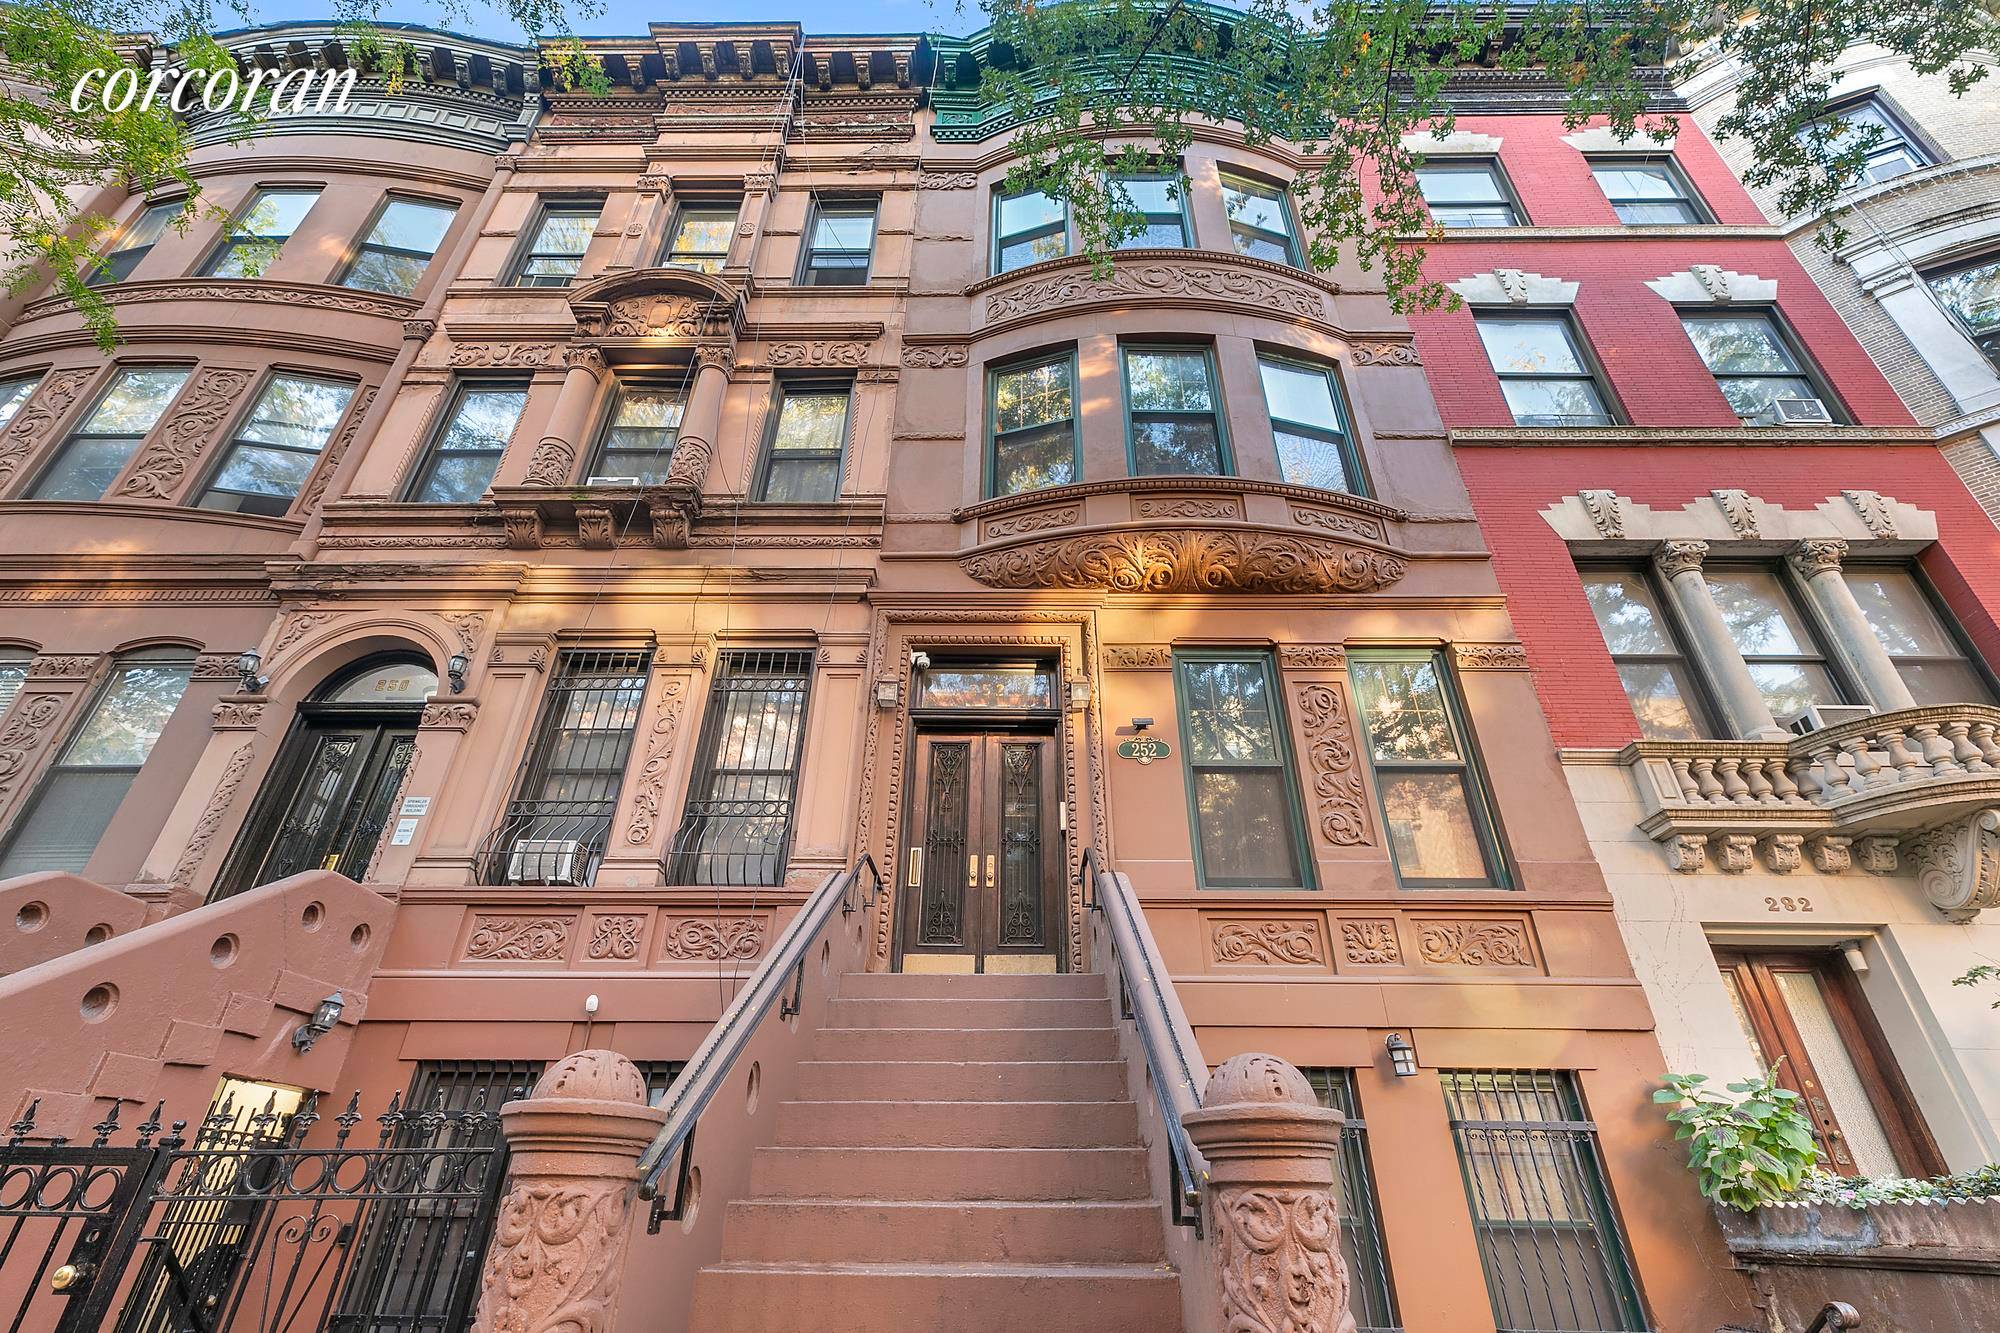 Now is the perfect time to purchase a 19ft Wide Beautiful 2 family Brownstone in Central Harlem.